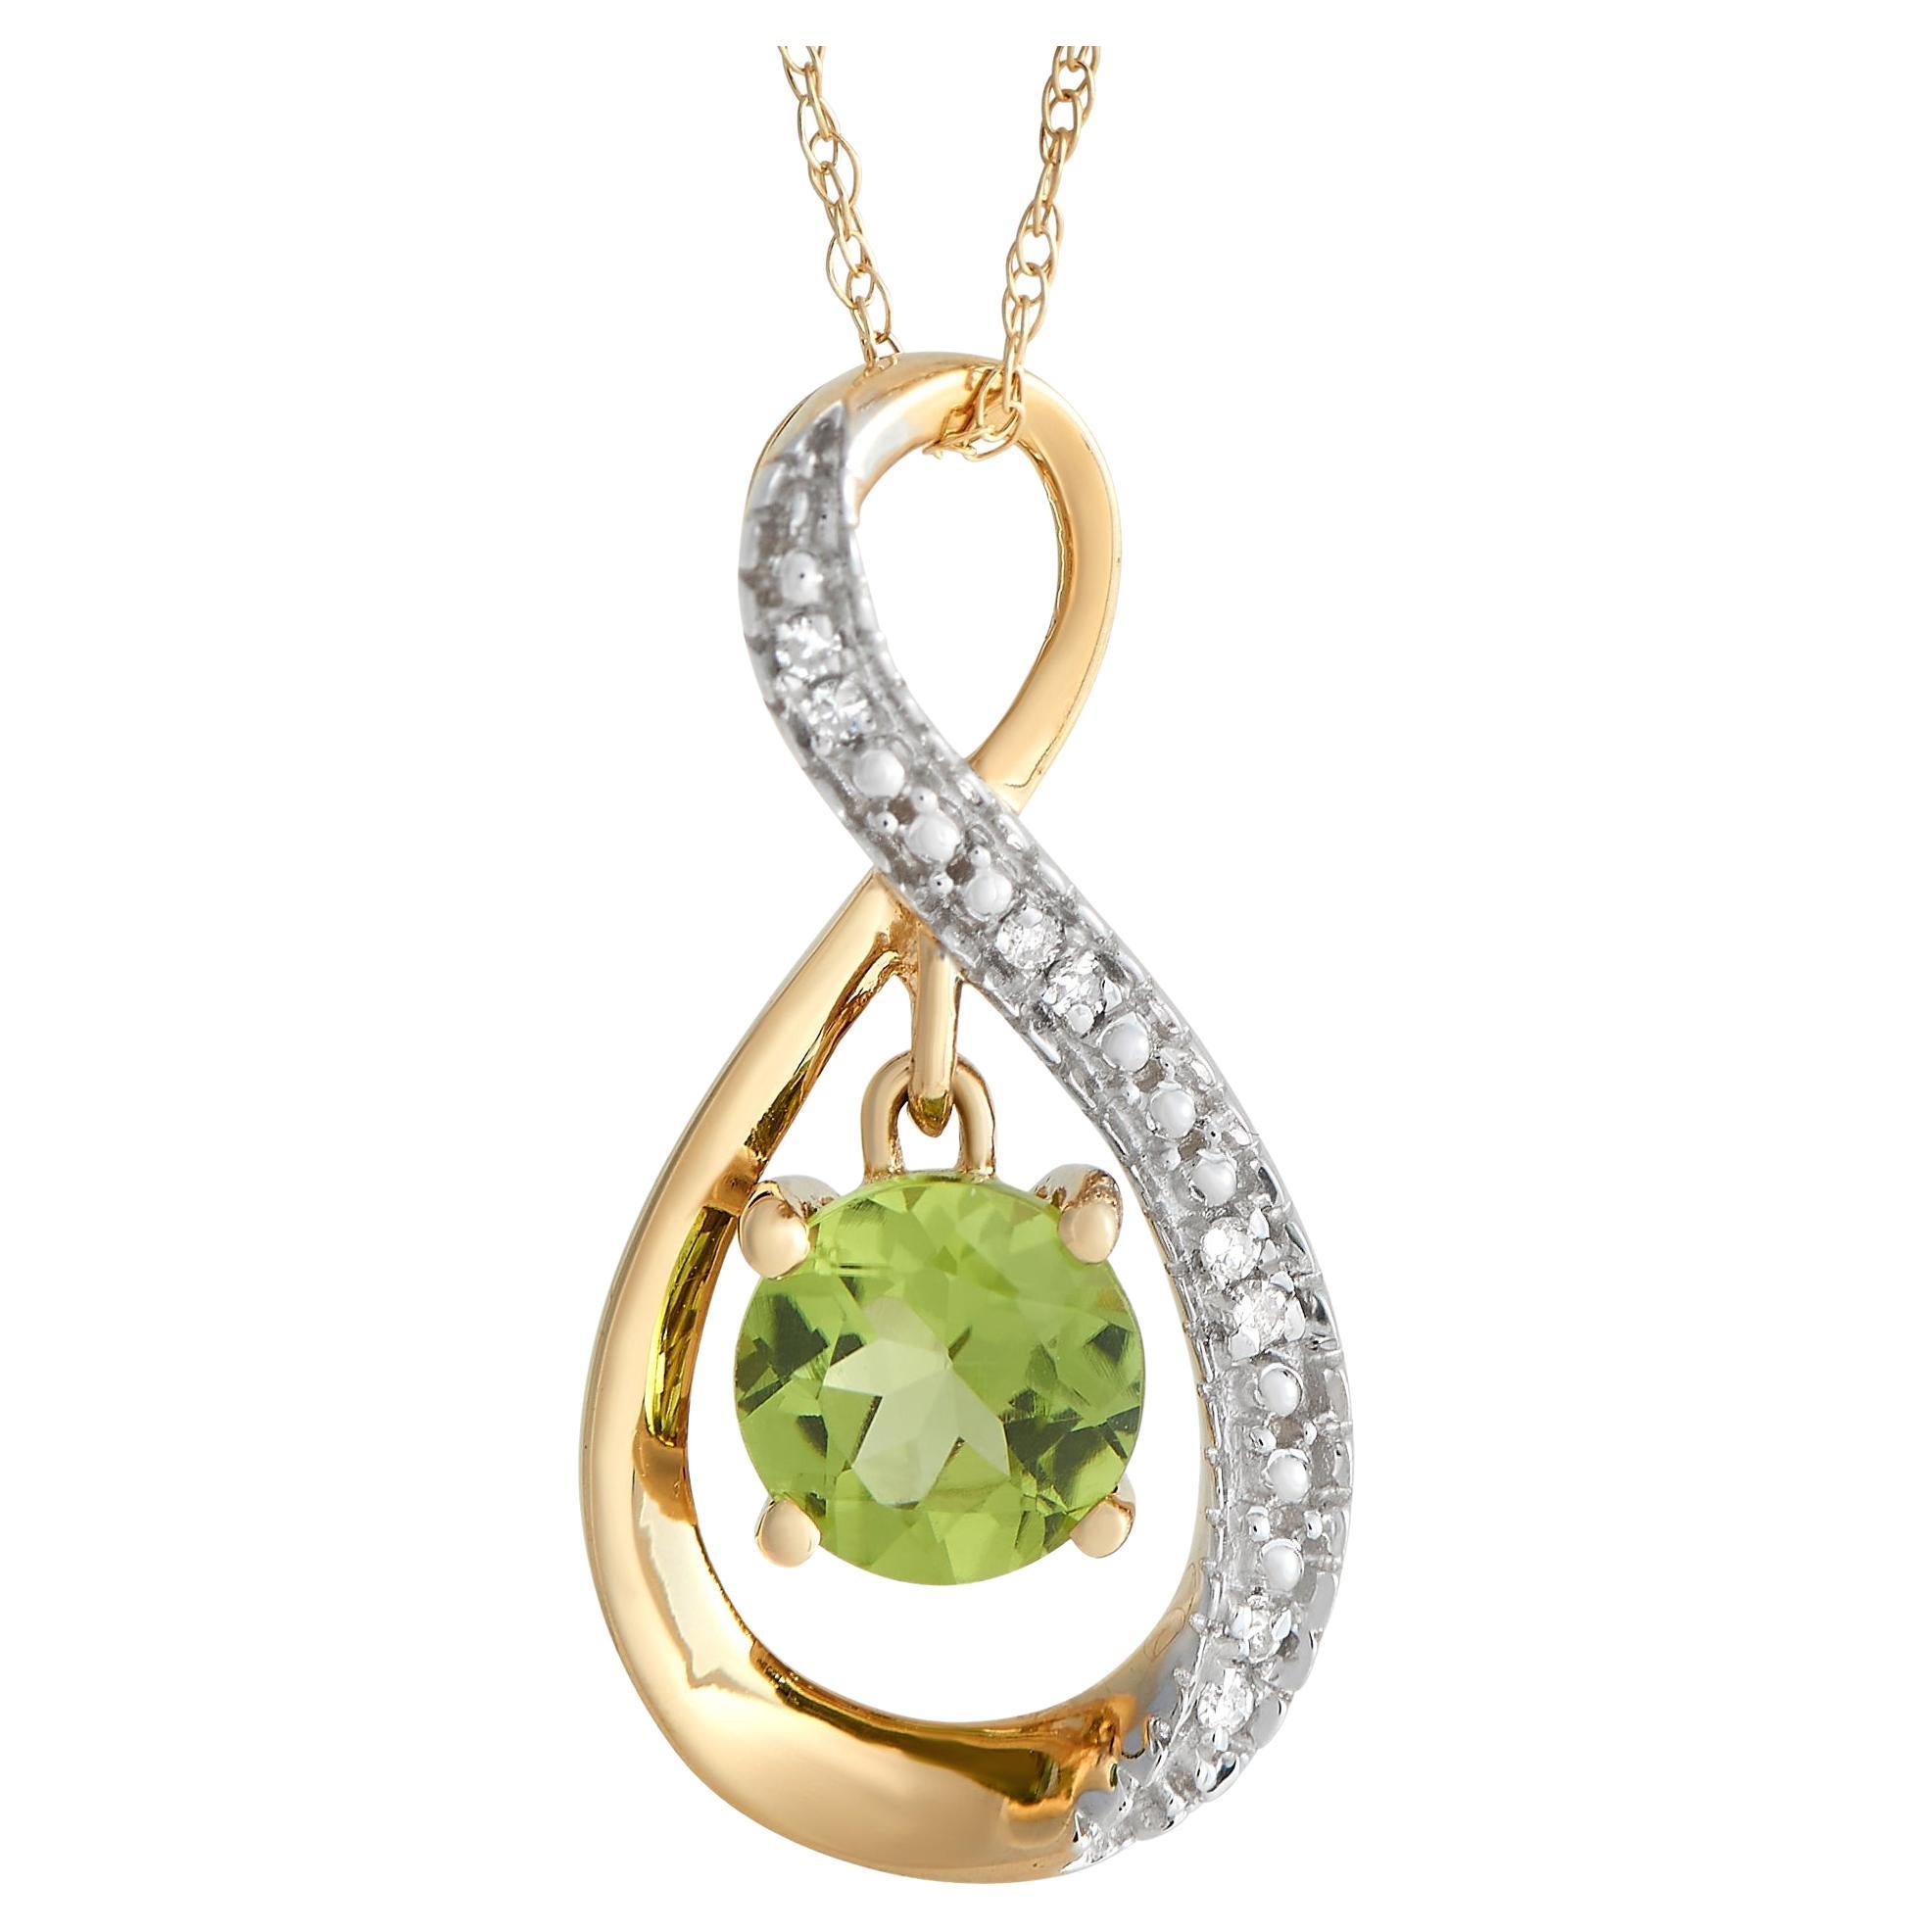 LB Exclusive 14K Yellow Gold 0.03 ct Diamond and Peridot Necklace